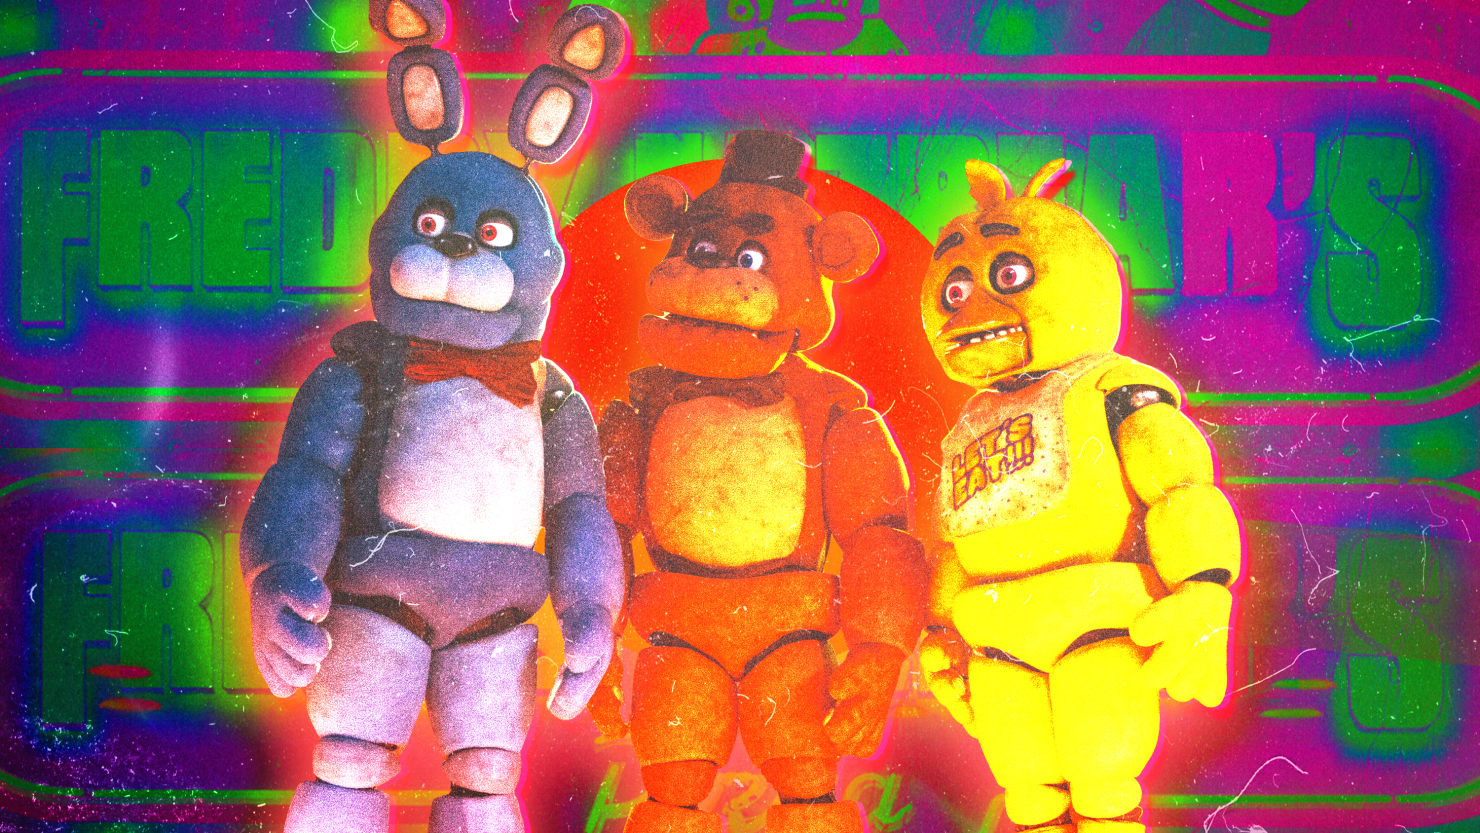 Five Nights at Freddy's review – horror game movie is an unscary Halloween  trick, Horror films